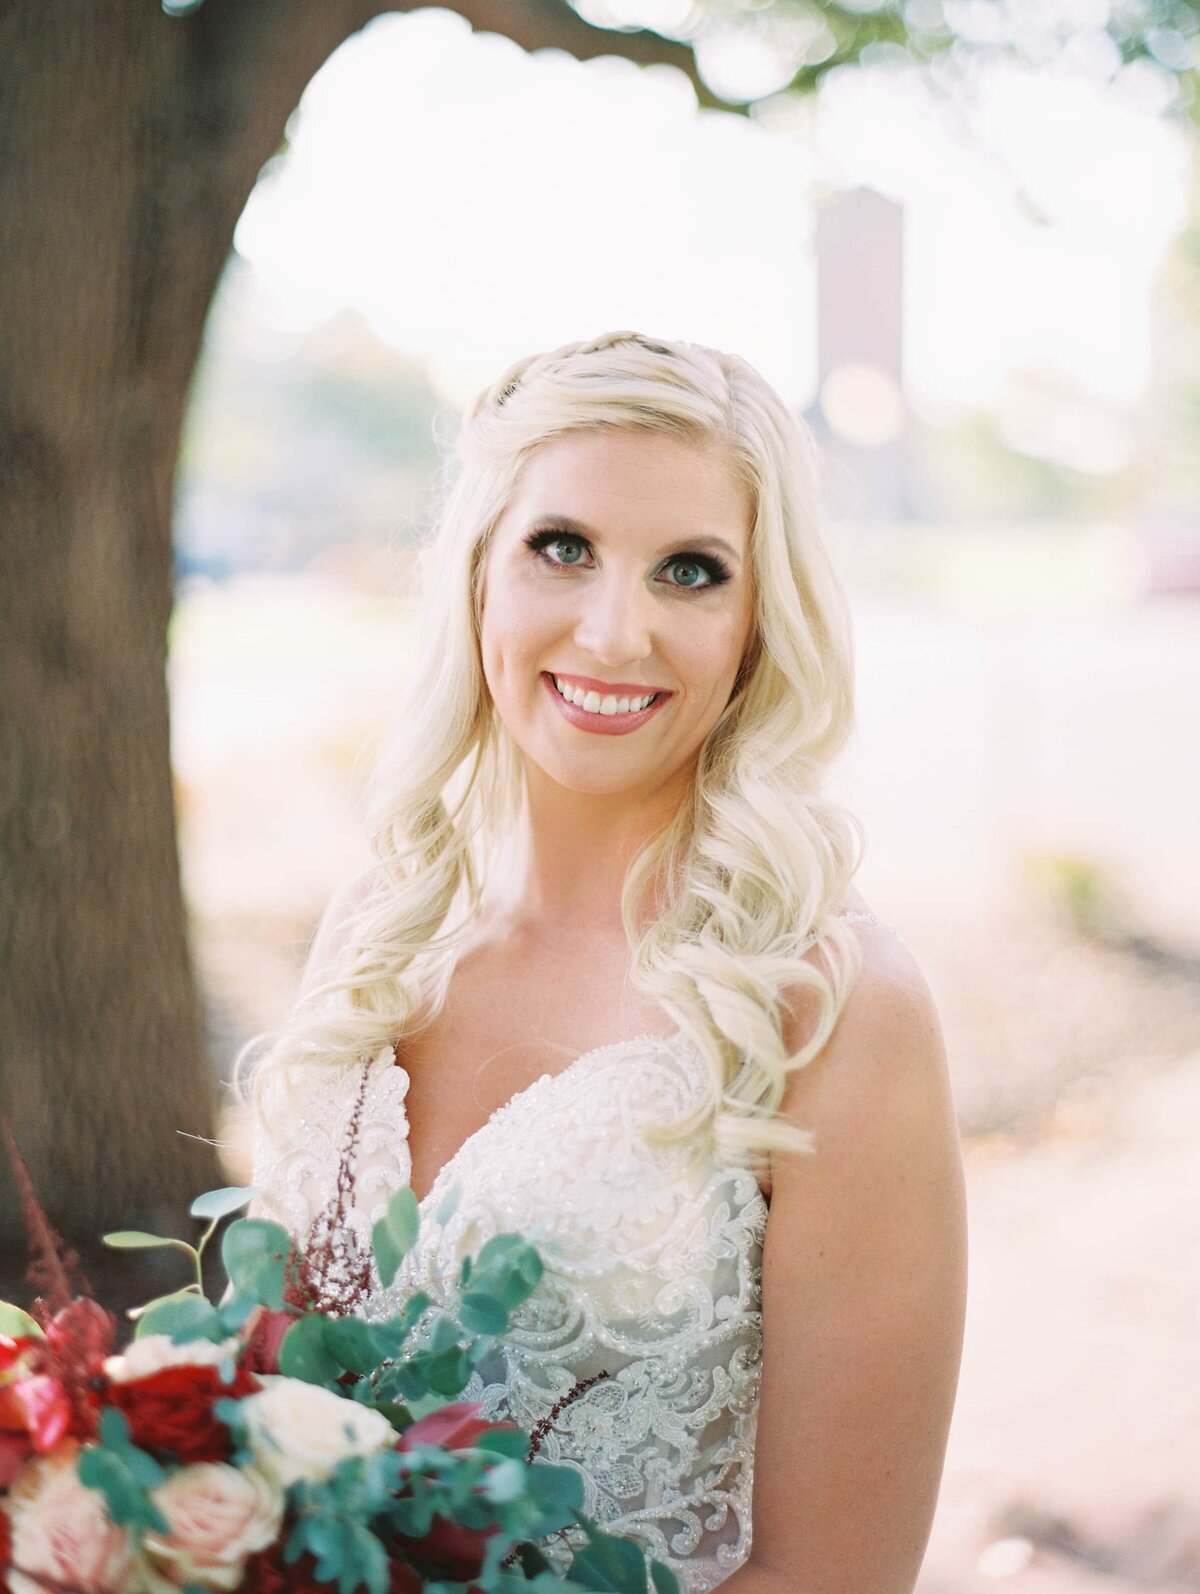 Blonde bride in a white wedding gown smiles at the camera while holding a floral bouquet with orchids and roses